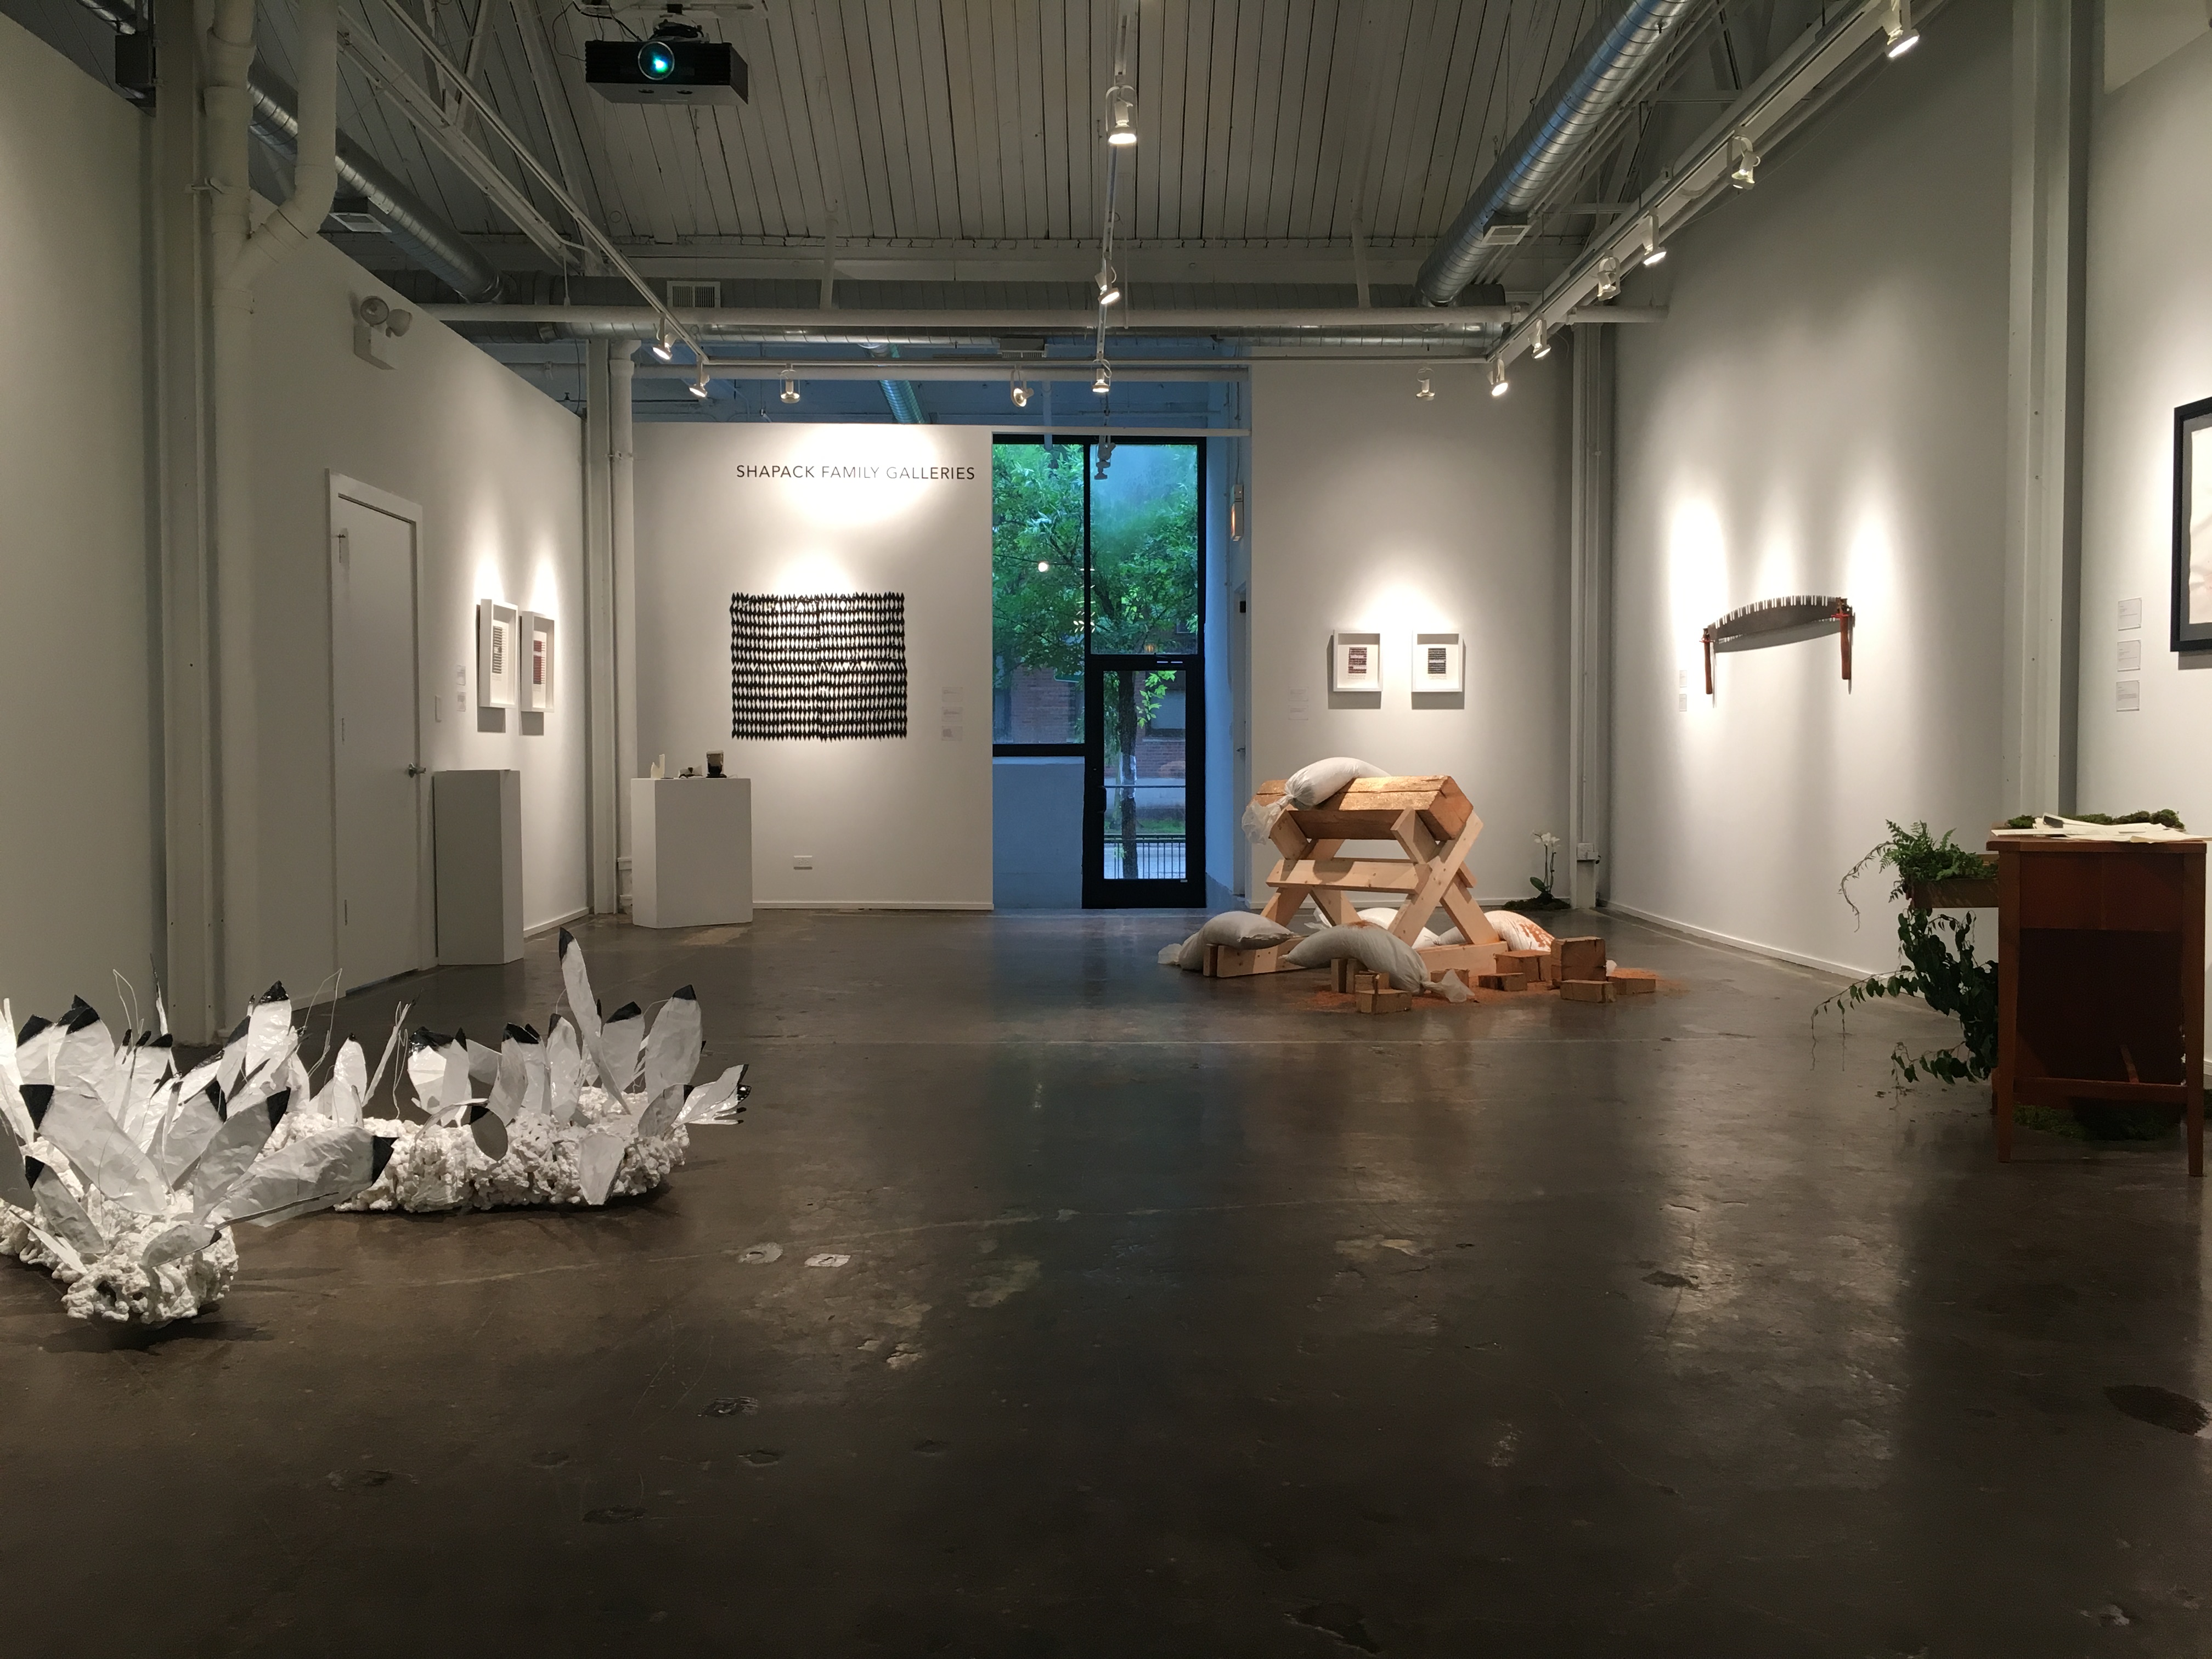 Image: A gallery view of the Shapack Family Galleries. A few pieces or work hang from the white walls as spotlights point in their direction. A few larger pieces are displayed on the concrete gallery floor. Straight ahead, a leafy green tree can be seen outside through the glass door that acts as entrance to the Chicago Artists Coalition building and the gallery space. Photo Courtesy of Chicago Artists Coalition.